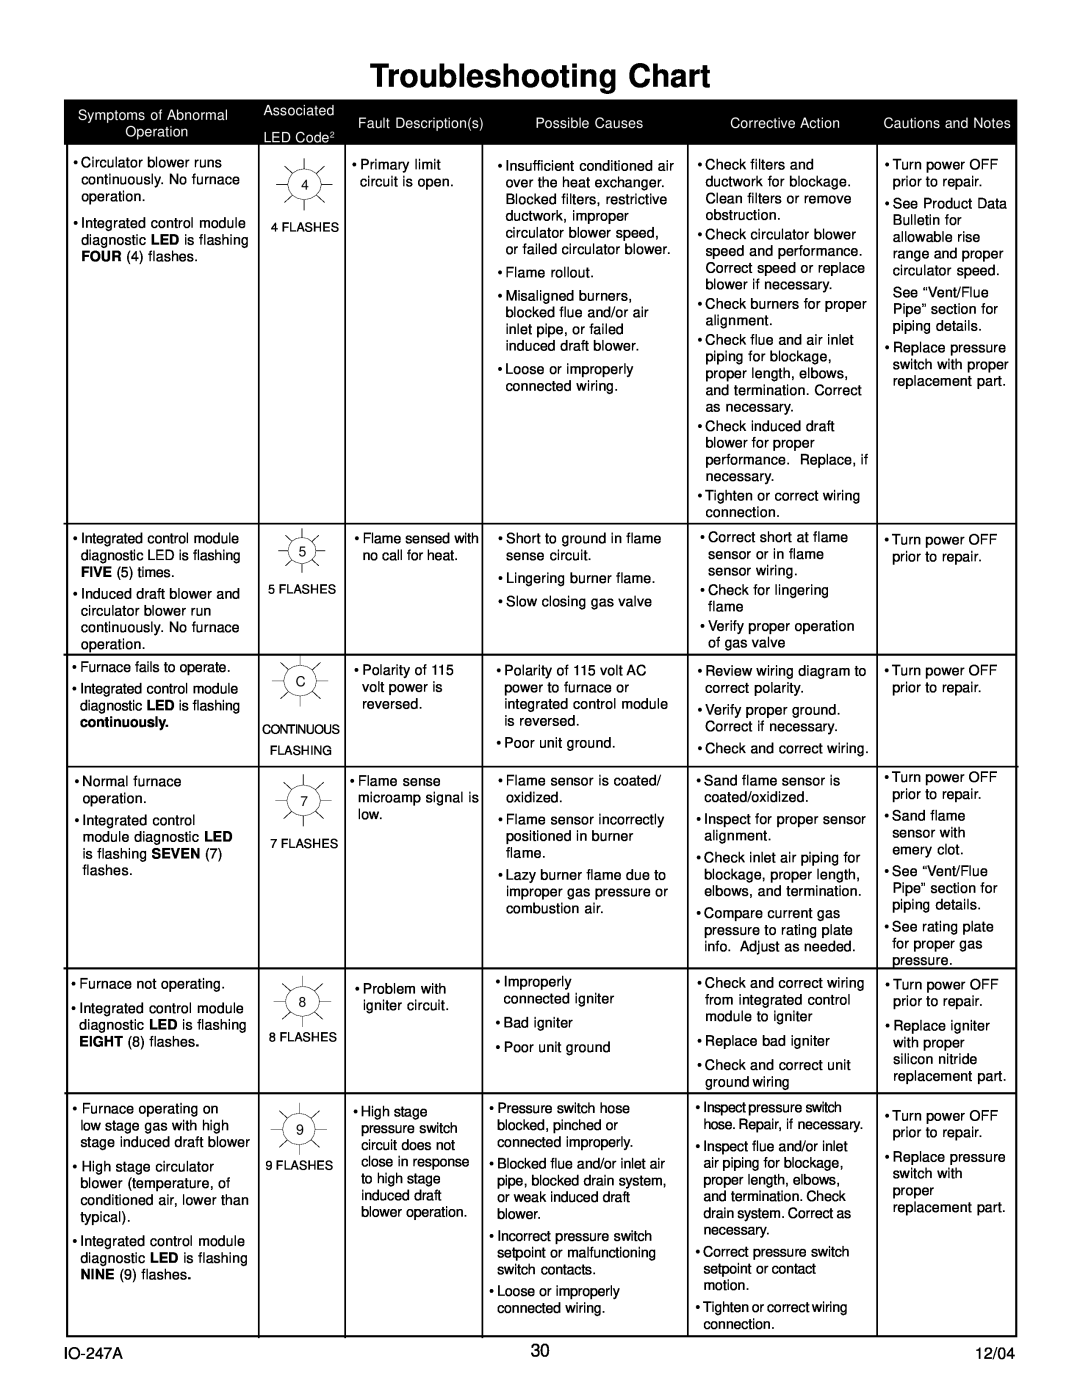 Goodman Mfg AMV8 Troubleshooting Chart, Symptoms of Abnormal, Associated, Fault Descriptions, Possible Causes, Operation 